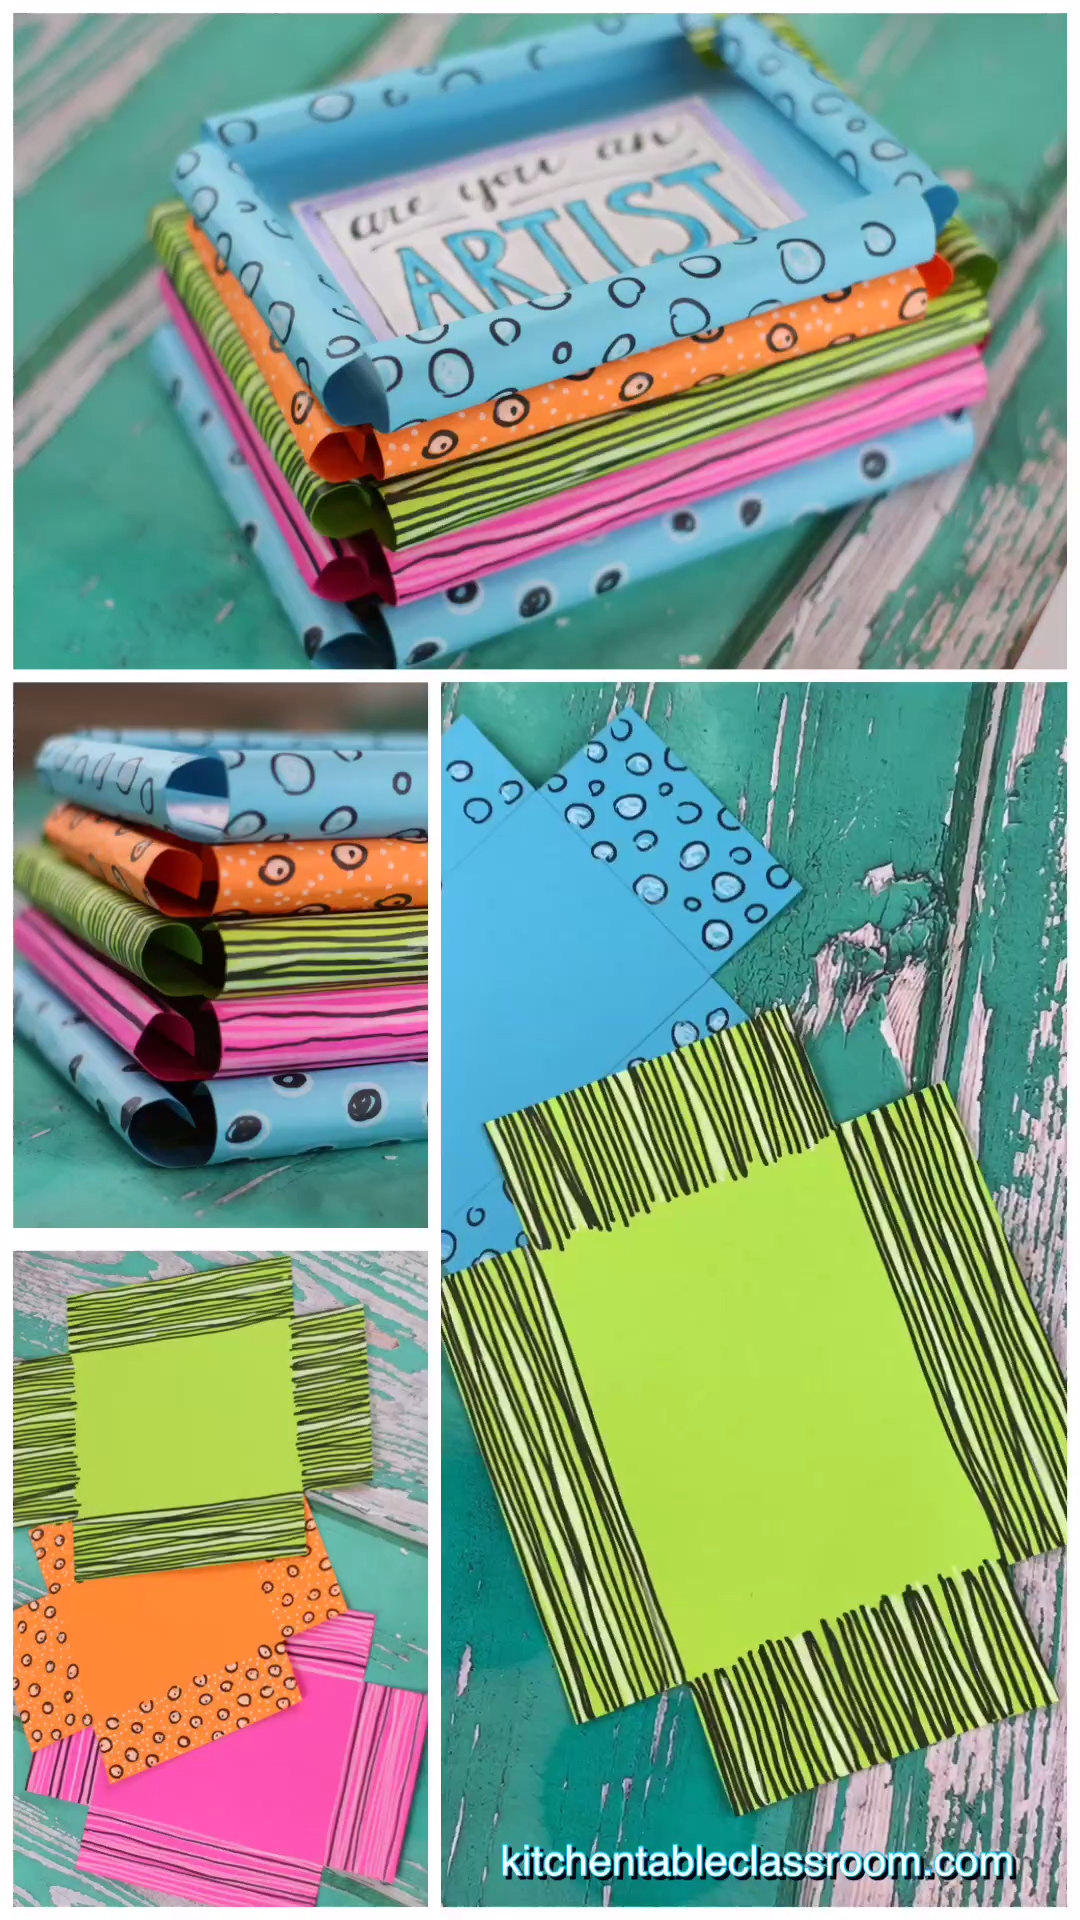 DIY Picture Frame-Super Simple Paper Picture Frames -   18 diy projects For The Home picture frames ideas